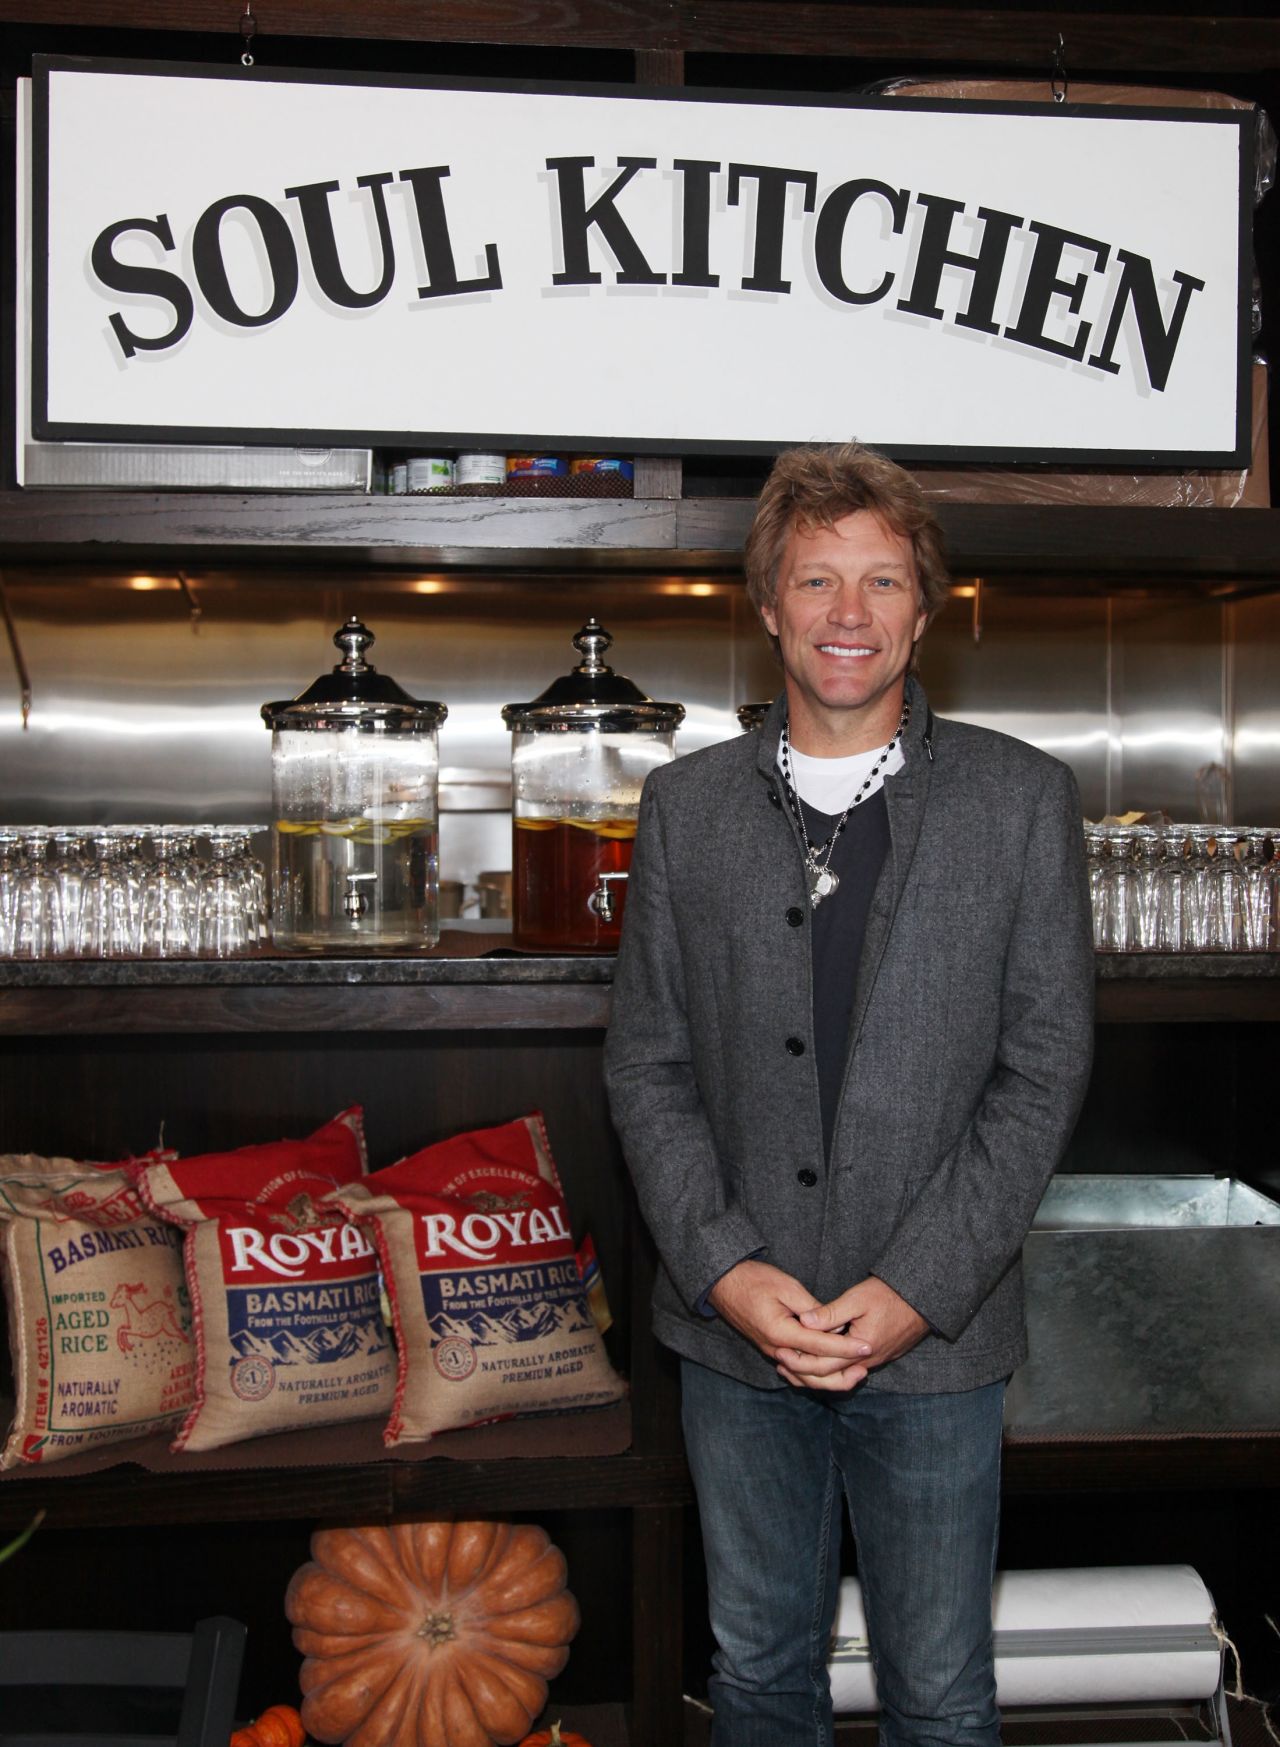 In October 2011, rocker Jon Bon Jovi opened the Soul Kitchen restaurant in his home state of New Jersey.  The pay-as-you-go community kitchen has no prices on the menu but asks people to volunteer or donate at least $10 for their meal.  The buzz around this endeavor landed Bon Jovi on the top of Forbes Magazine's "Most Valuable Celebrity Charity Relationships," which measures the amount of publicity generated by each star for their cause. 